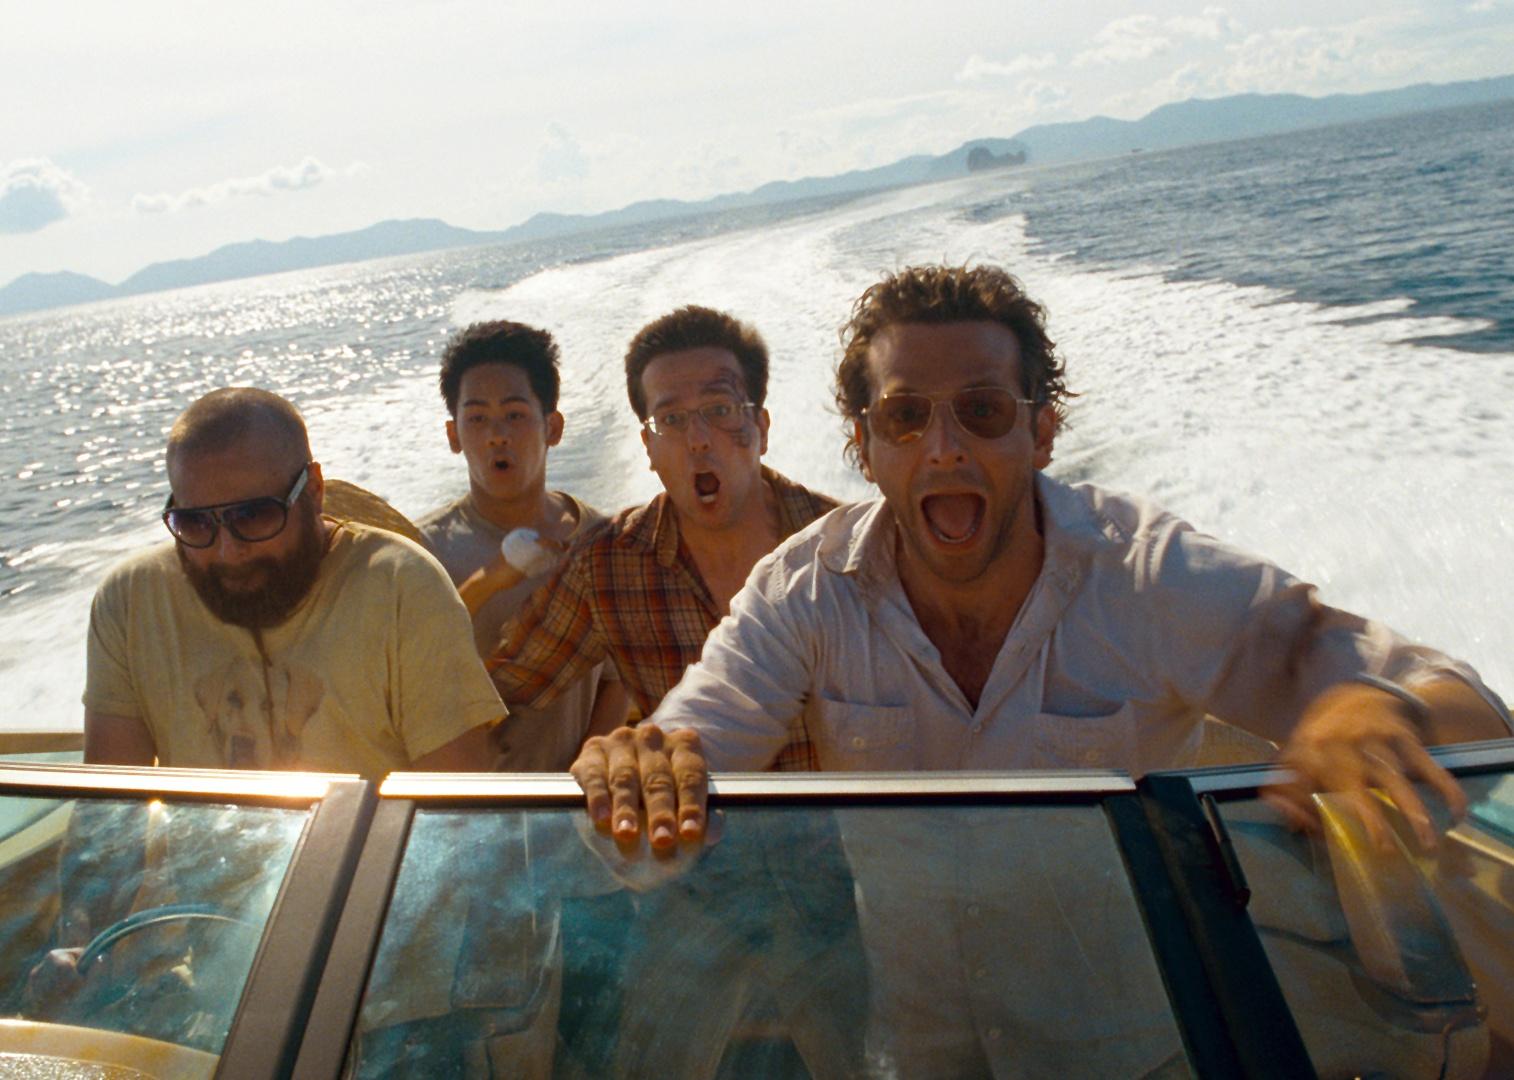 Bradley Cooper, Zach Galifianakis, Mason Lee, and Ed Helms with scared looks on their faces in a speed boat.